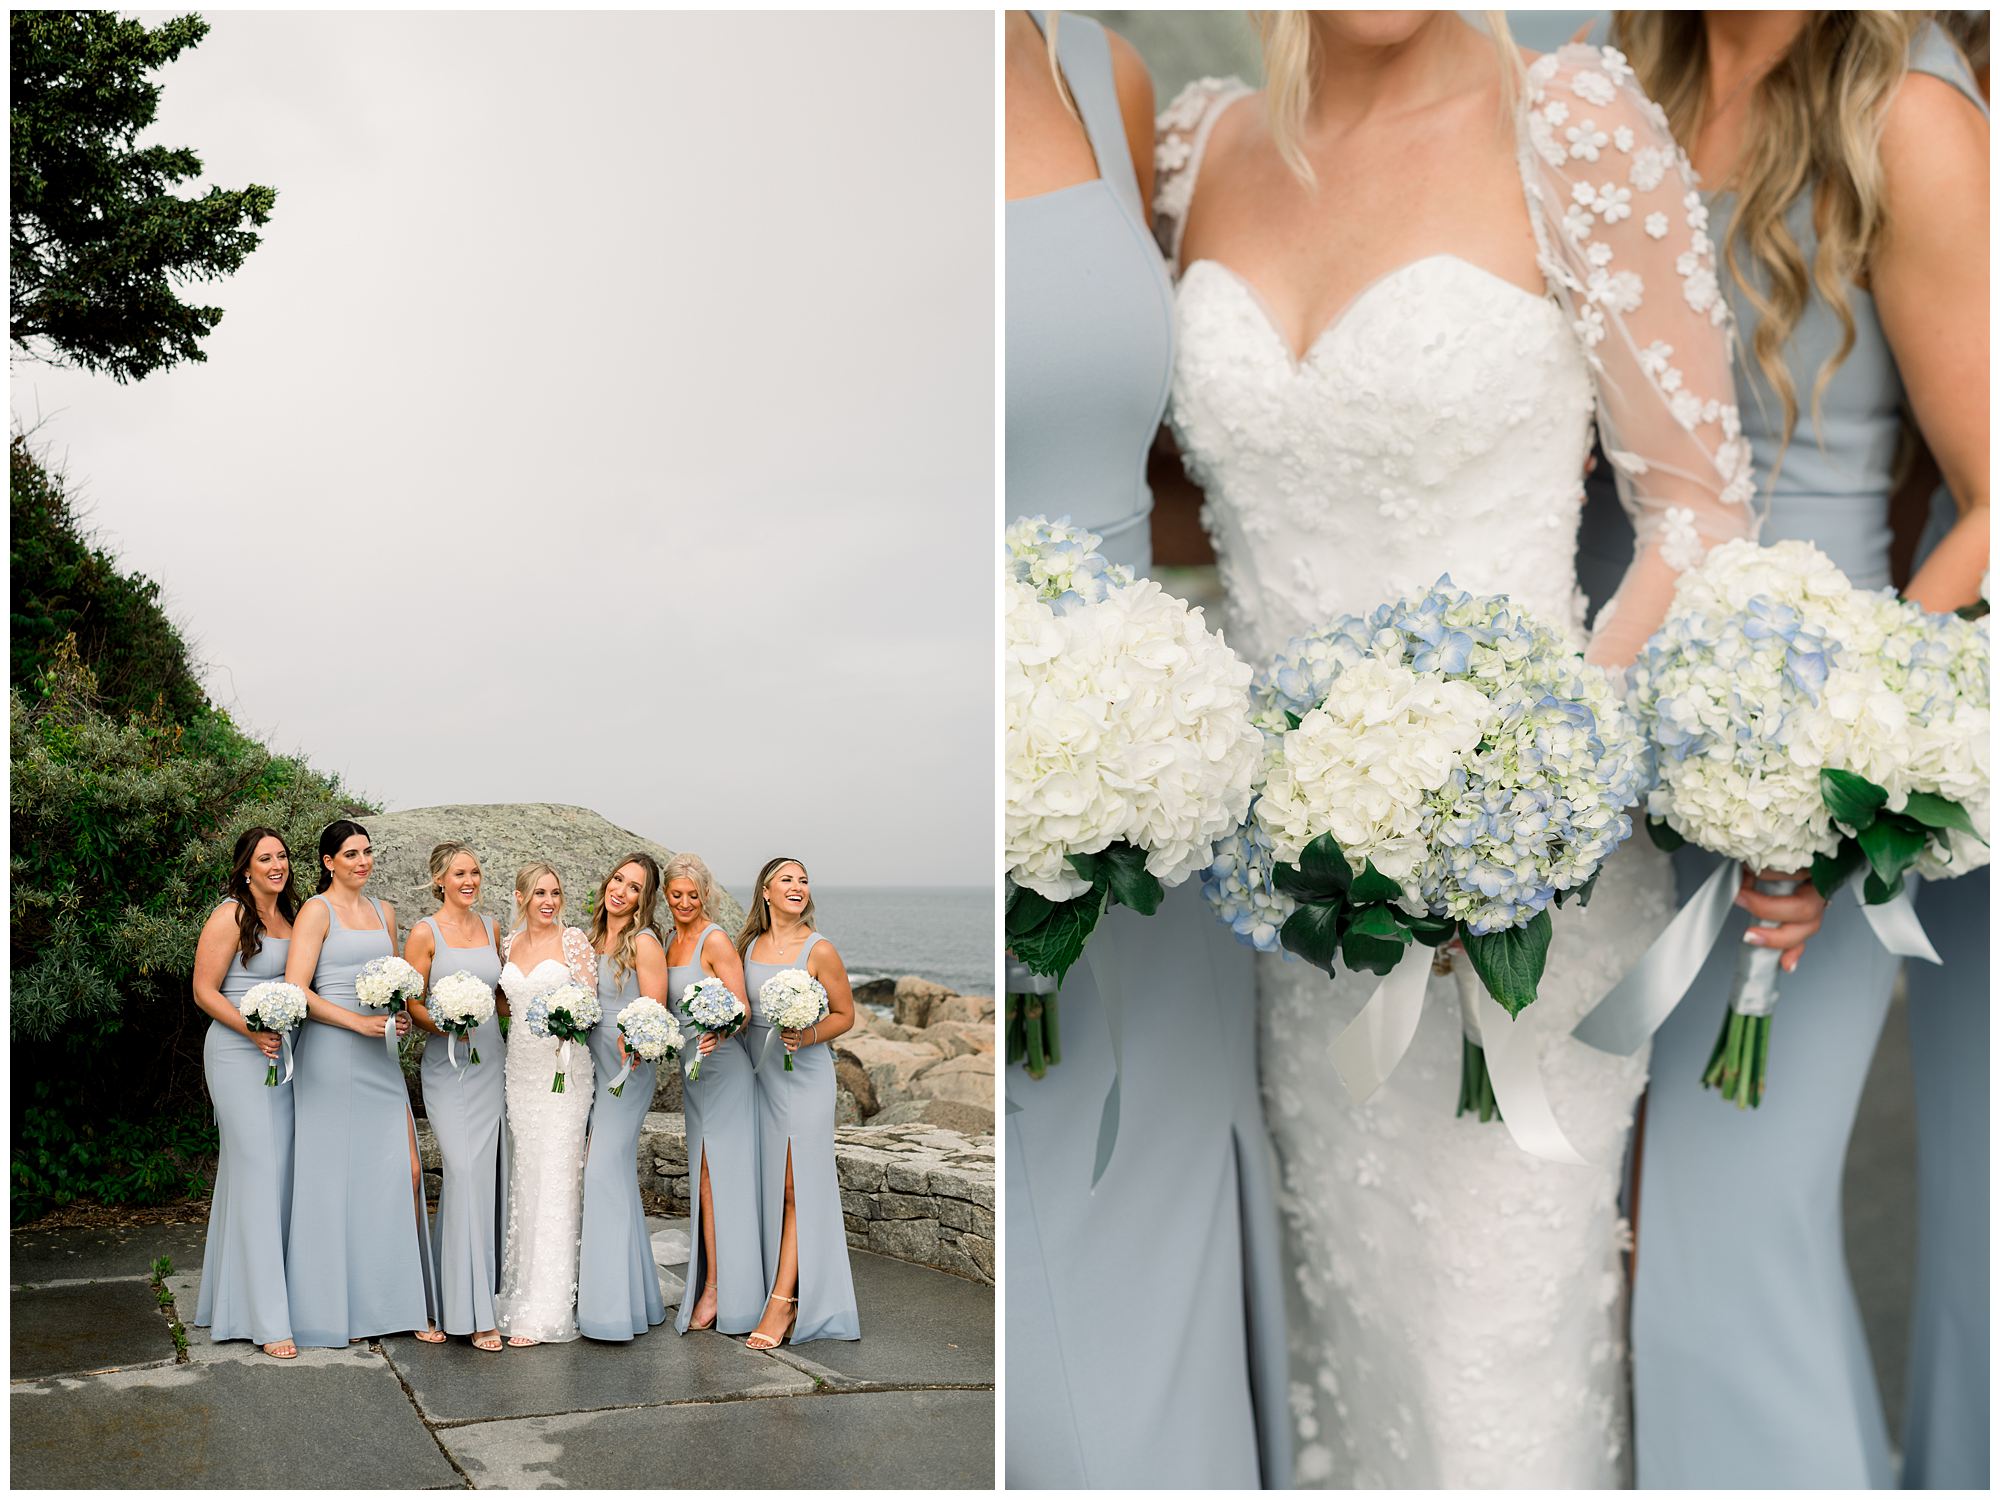 Wedding party photos overlooking Nubble Light at Viewpoint Hotel in York Maine